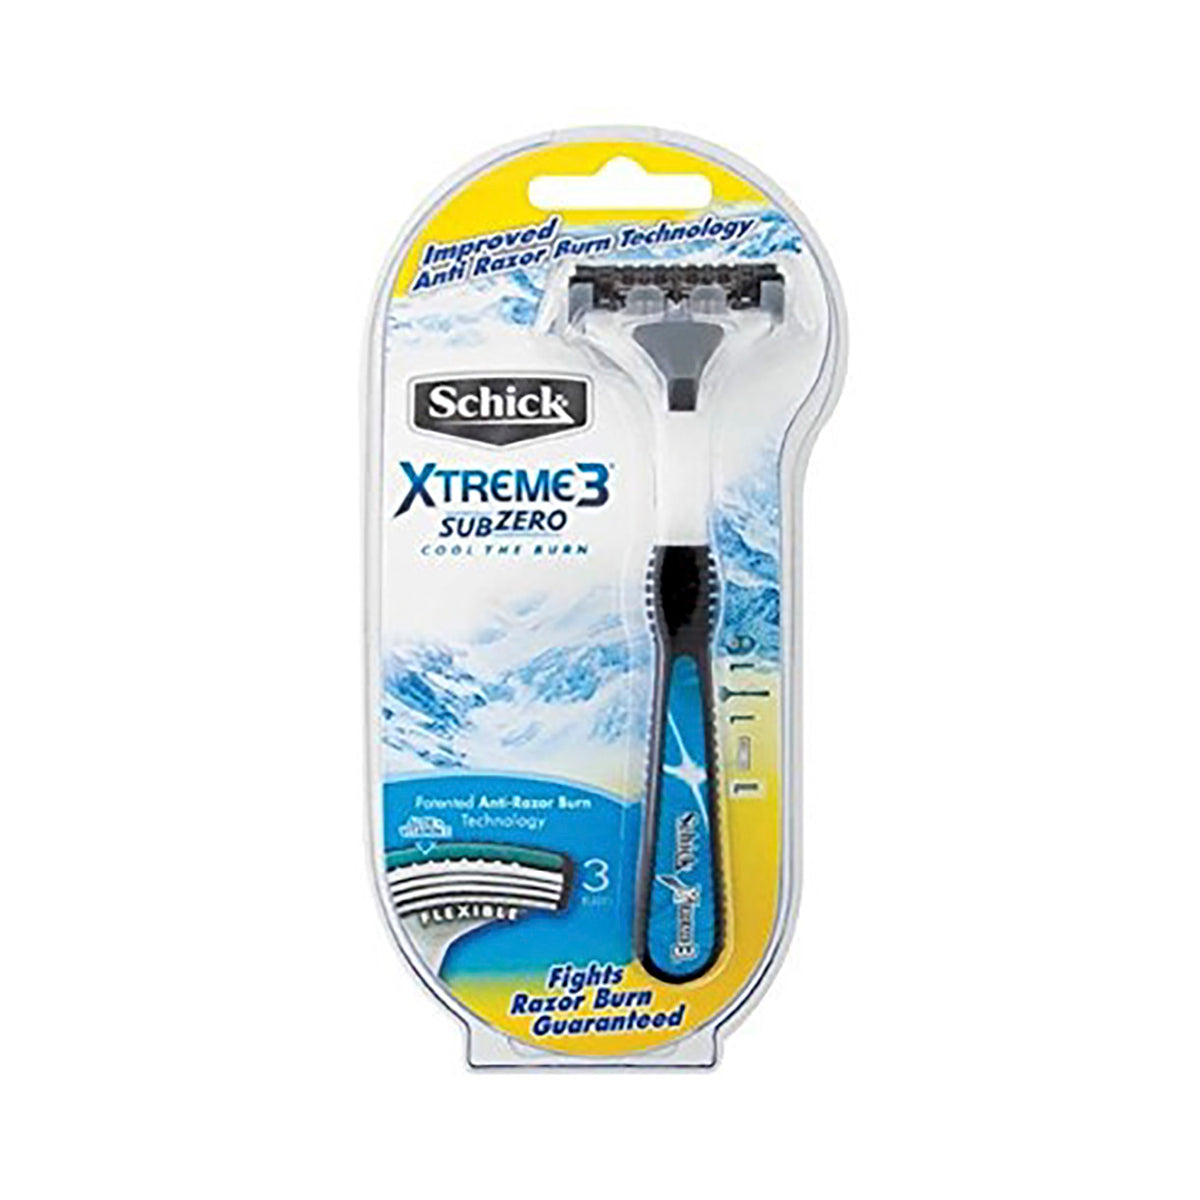 schick xtreme 3 display male model